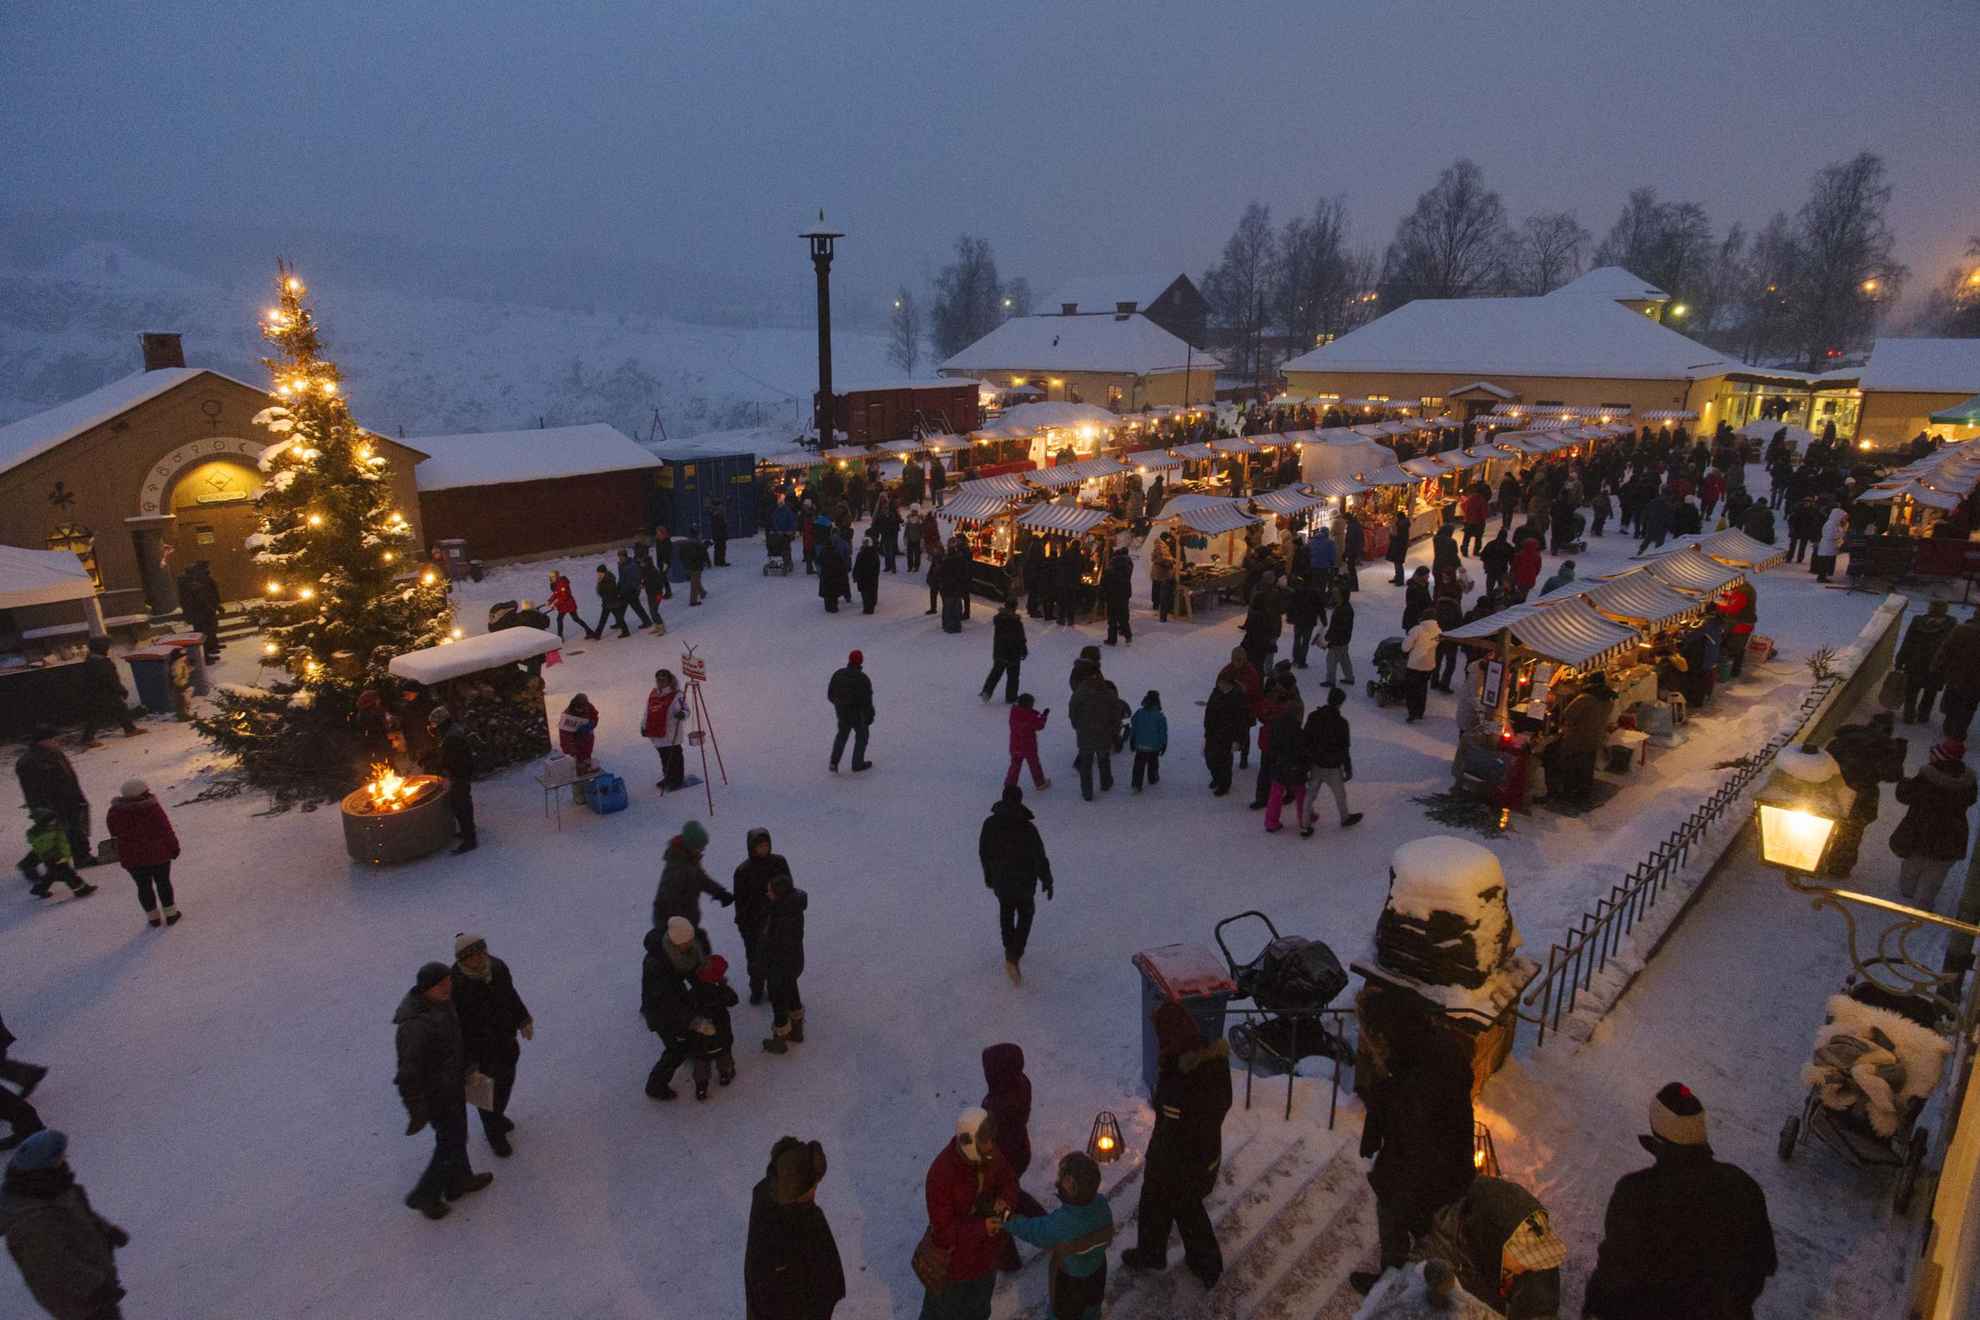 A Christmas market in the snow, with many stalls, people and a large Christmas tree by a little bonfire.